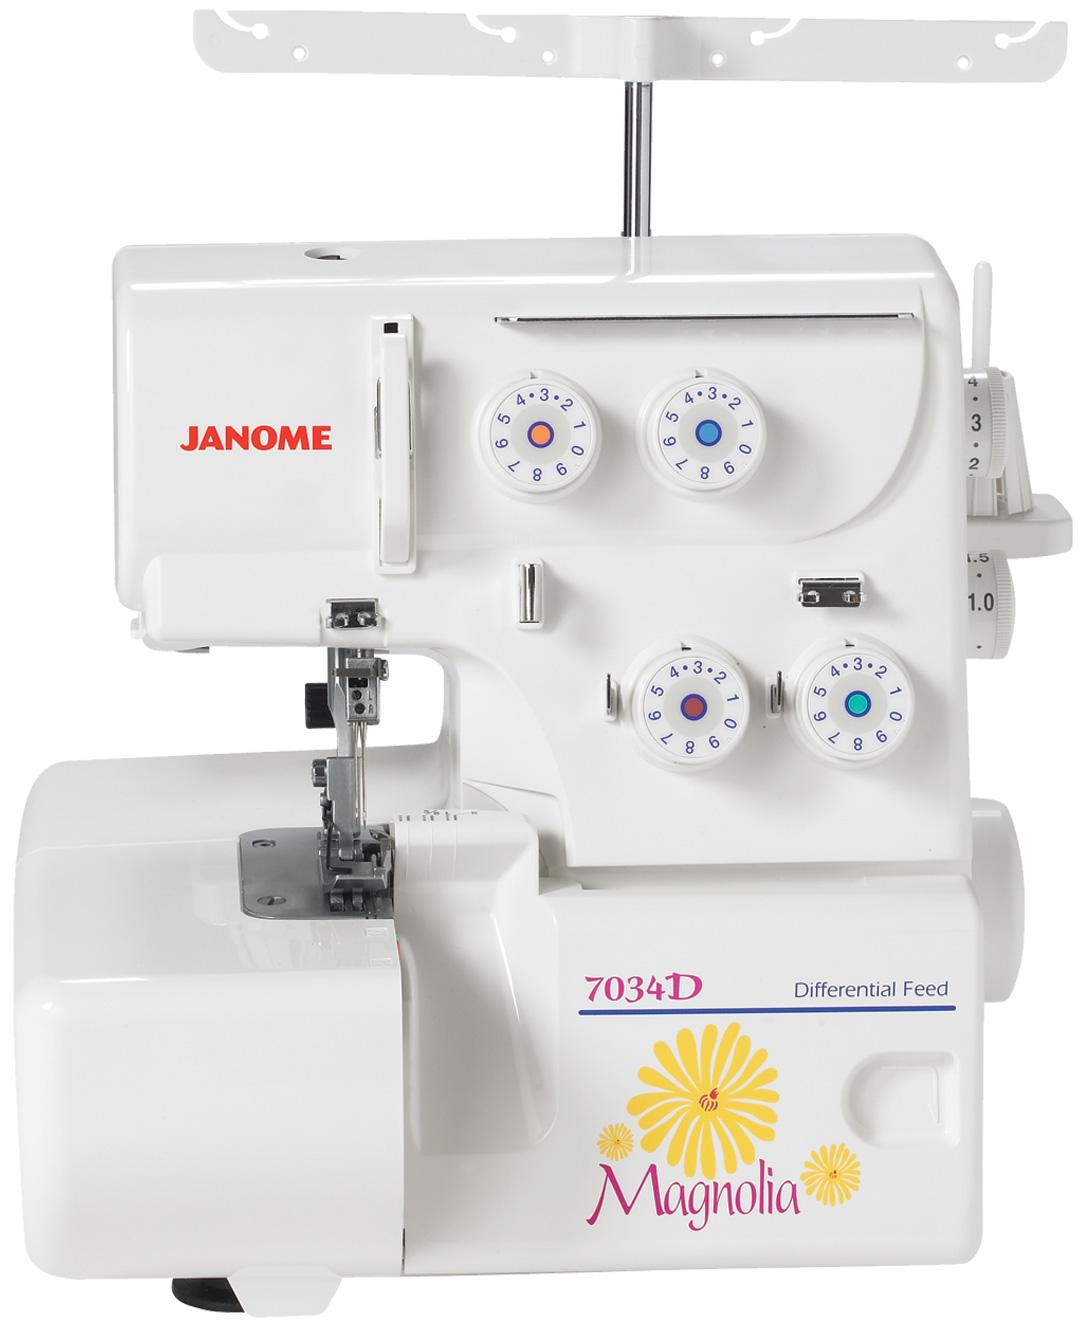 Refurbished Janome Magnolia 7034D 3- & 4-Thread Serger w/ Differential Feed